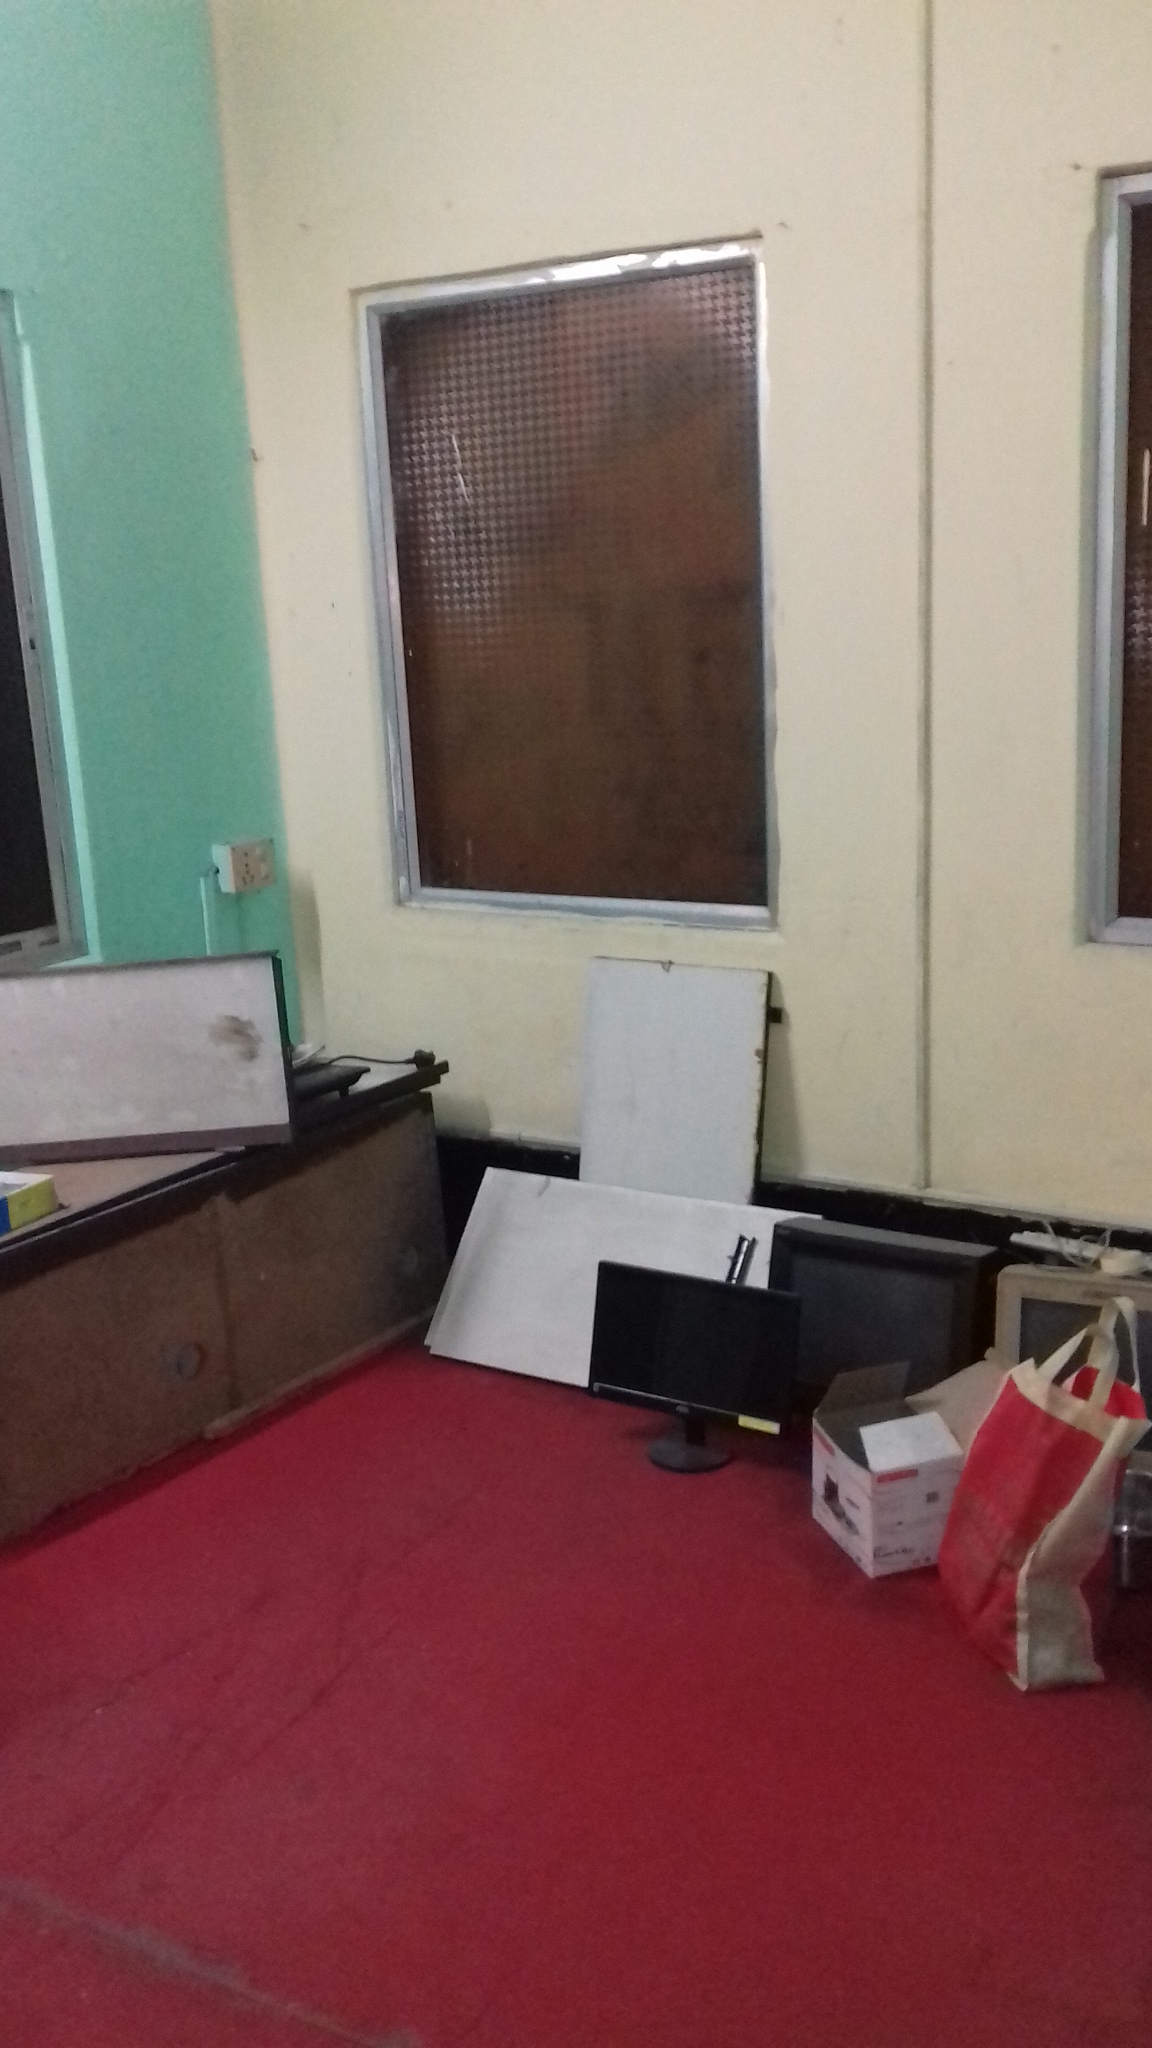 Office For Rent in Nager Bazar Kolkata (Id: 11325)